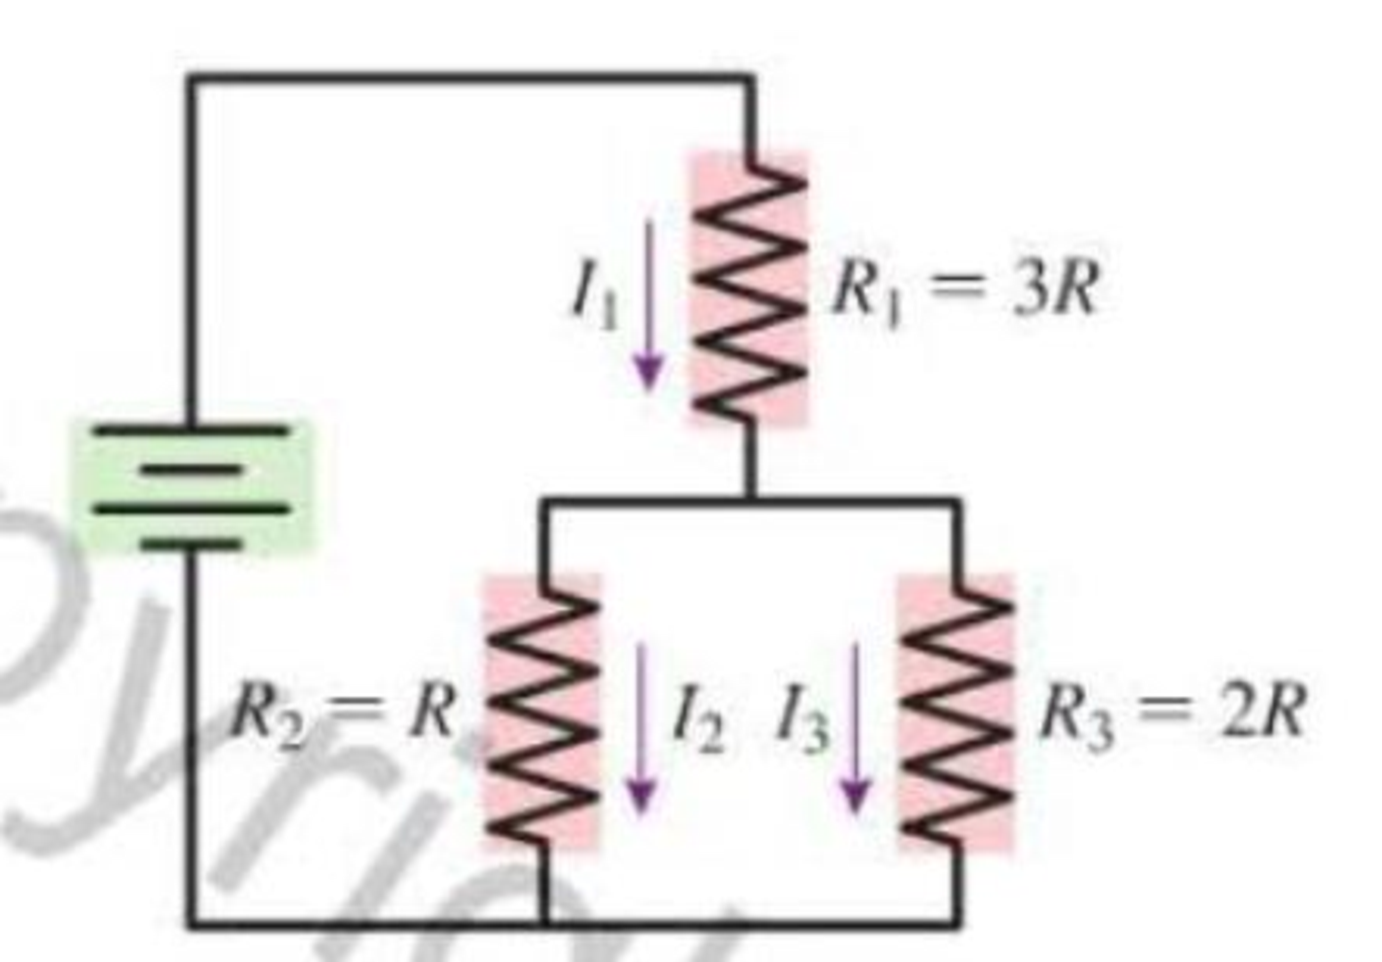 Chapter 23, Problem 12CQ, Rank in order, from largest to smallest, the currents I1, I2, and I3 in the circuit diagram in 